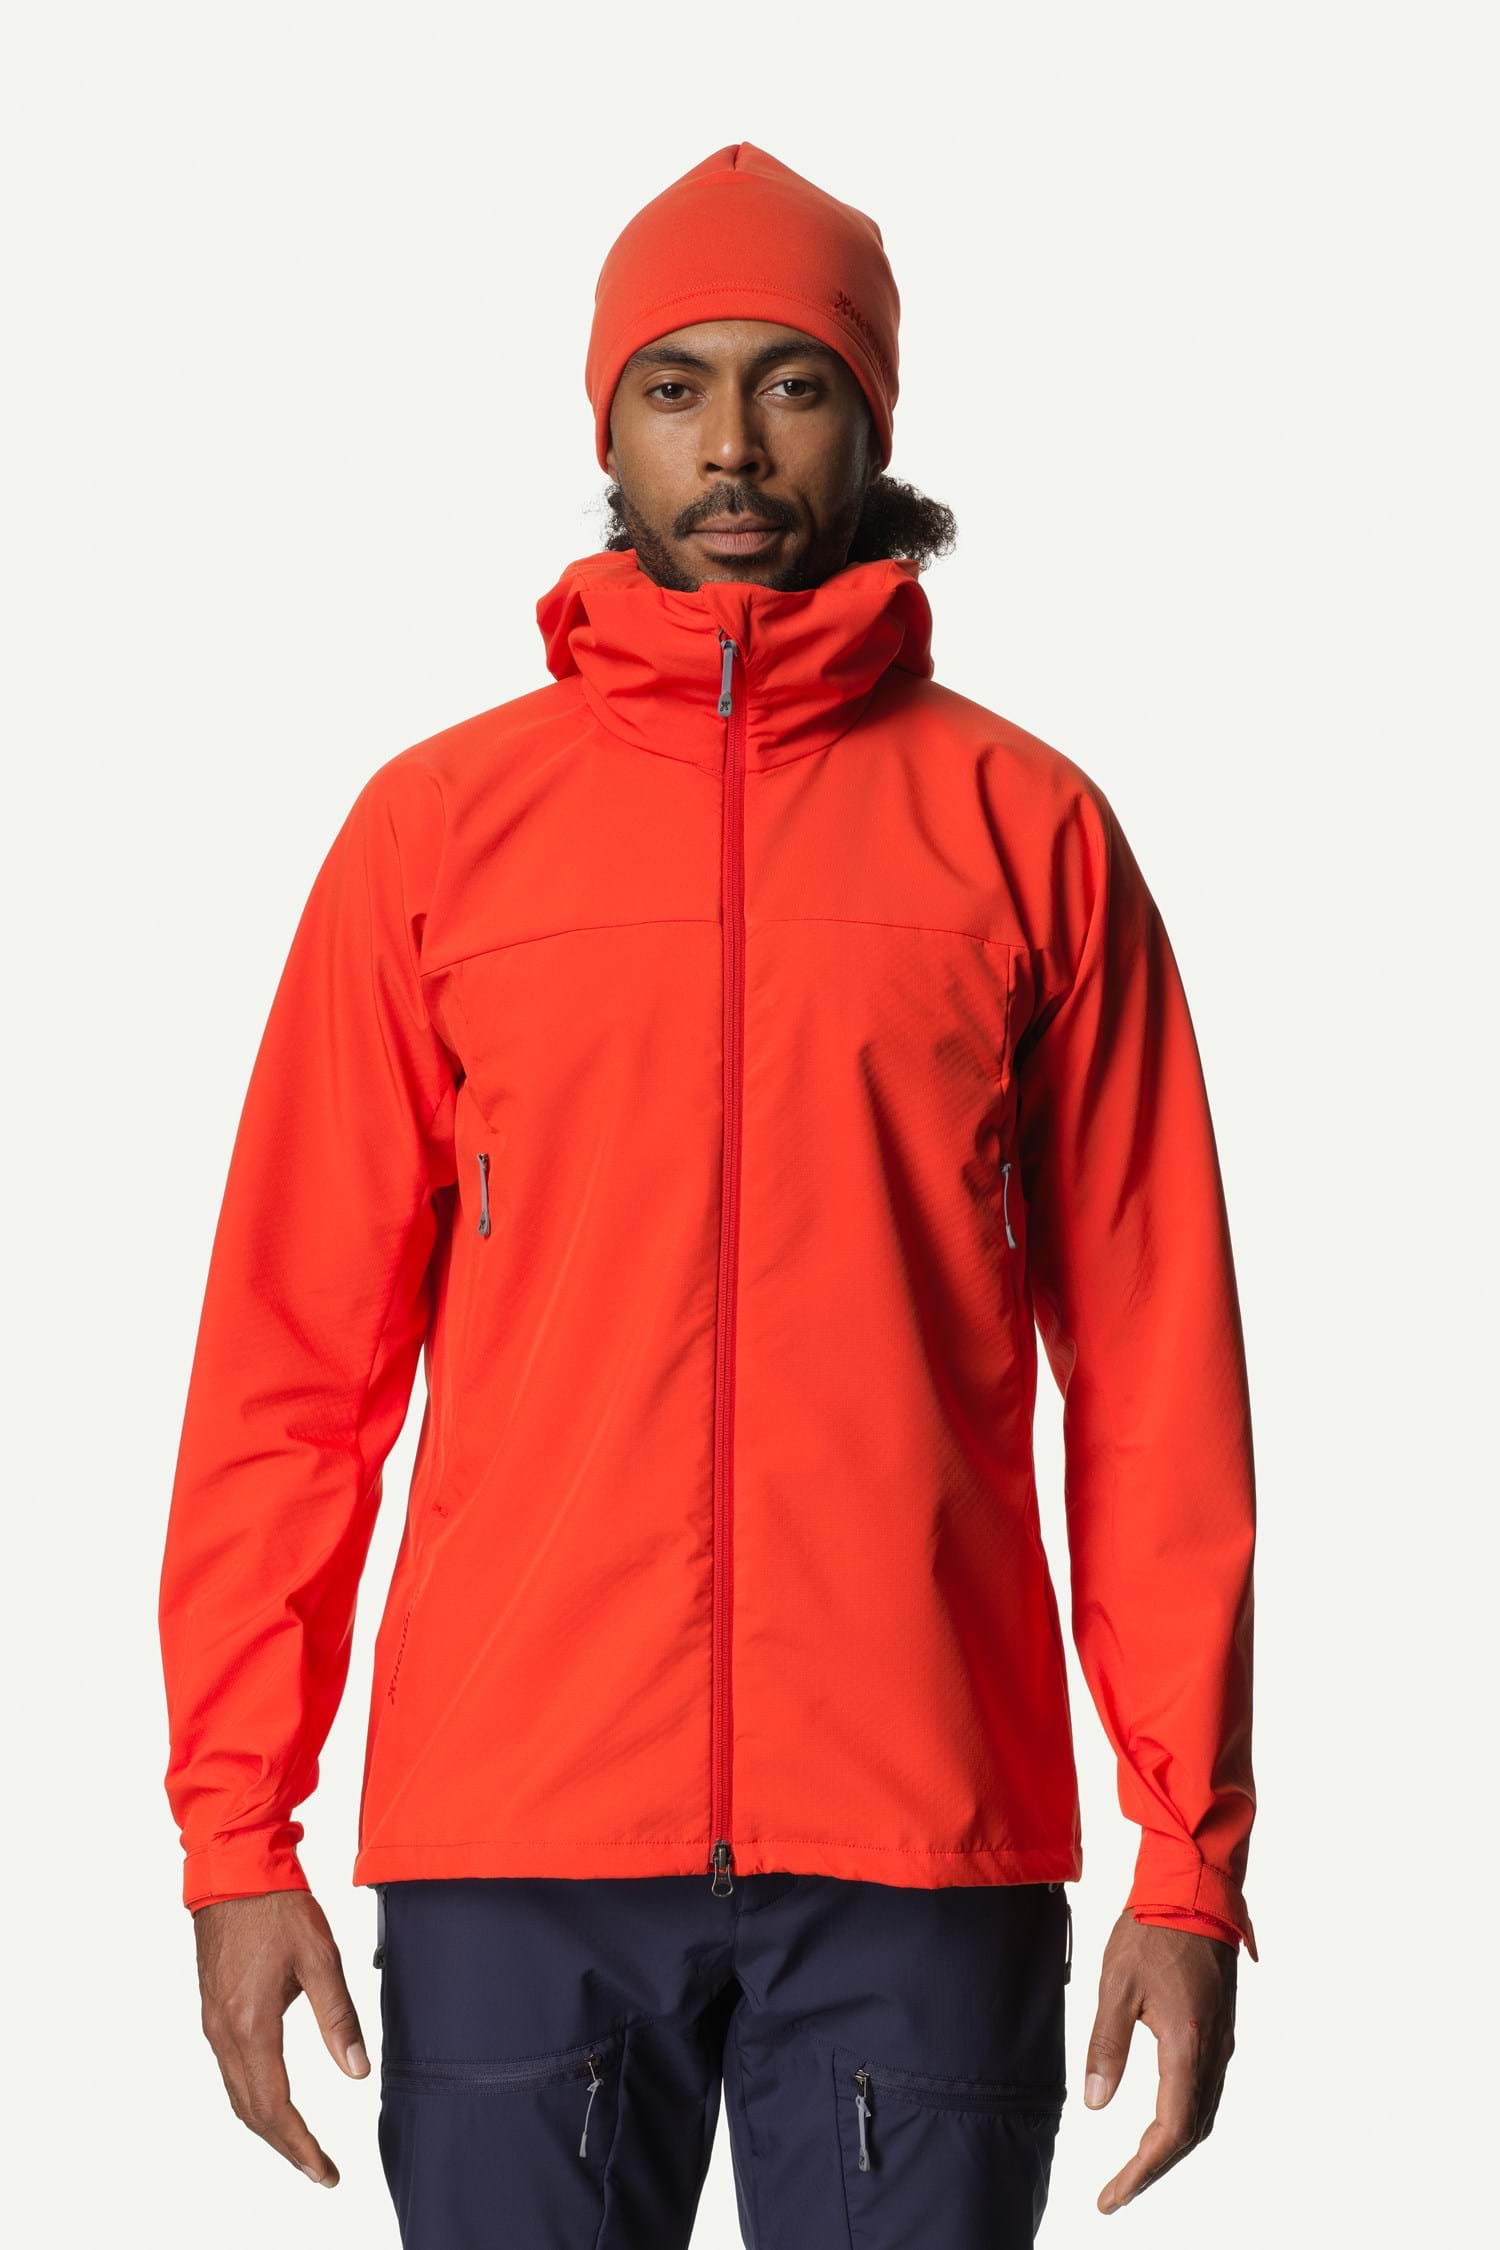 Houdini M's Pace Jacket, More Than Red, L